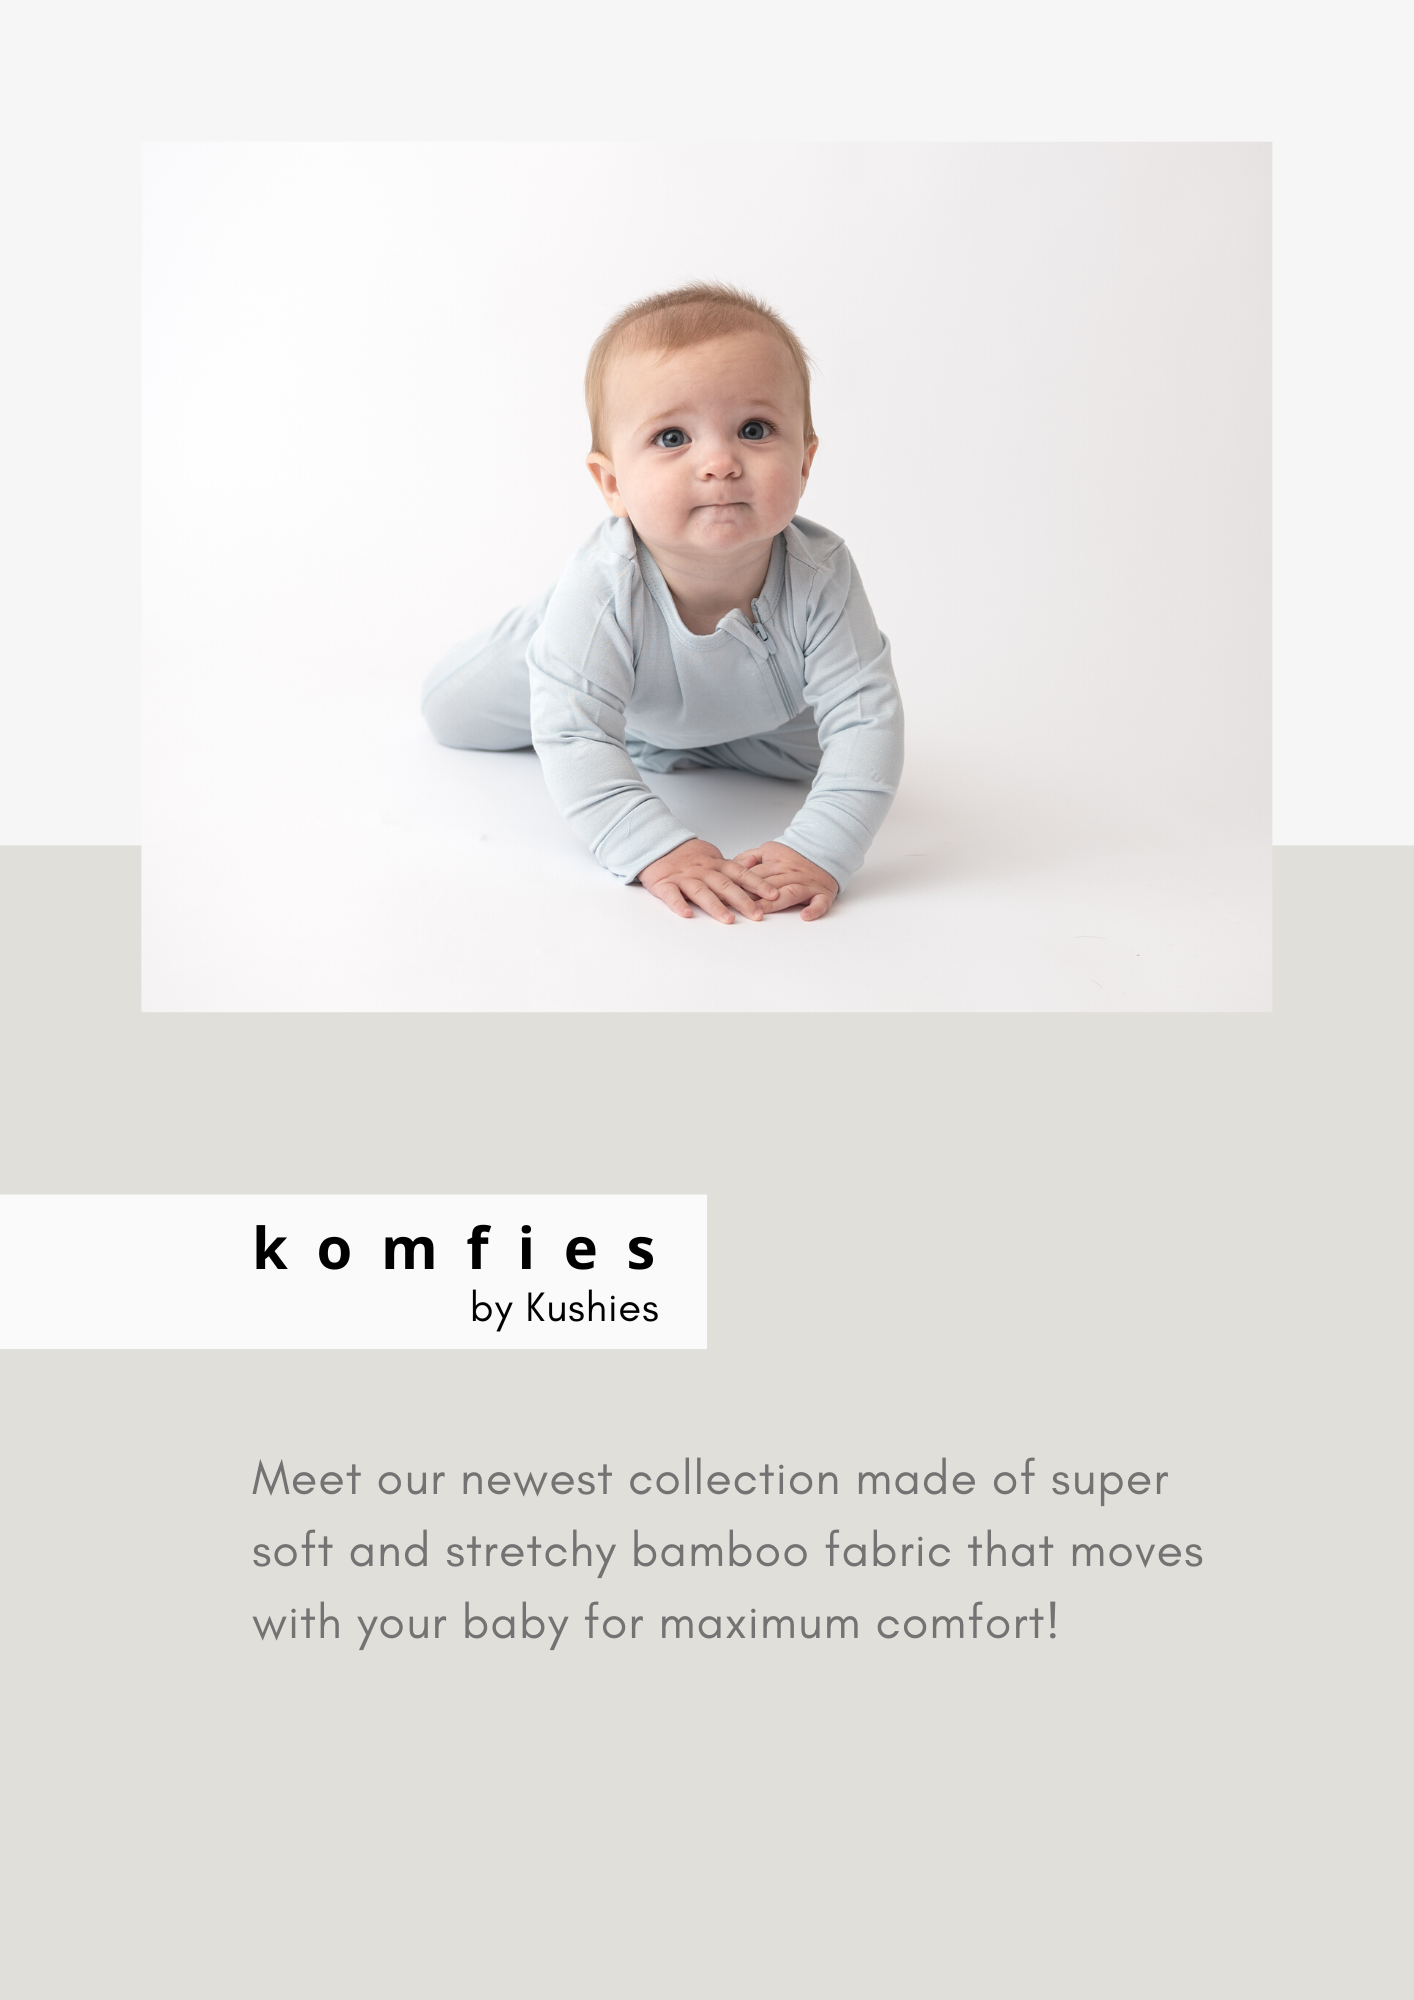 Meet our newest collection made of super soft and stretchy bamboo fabric that moves with your baby for maximum comfort!